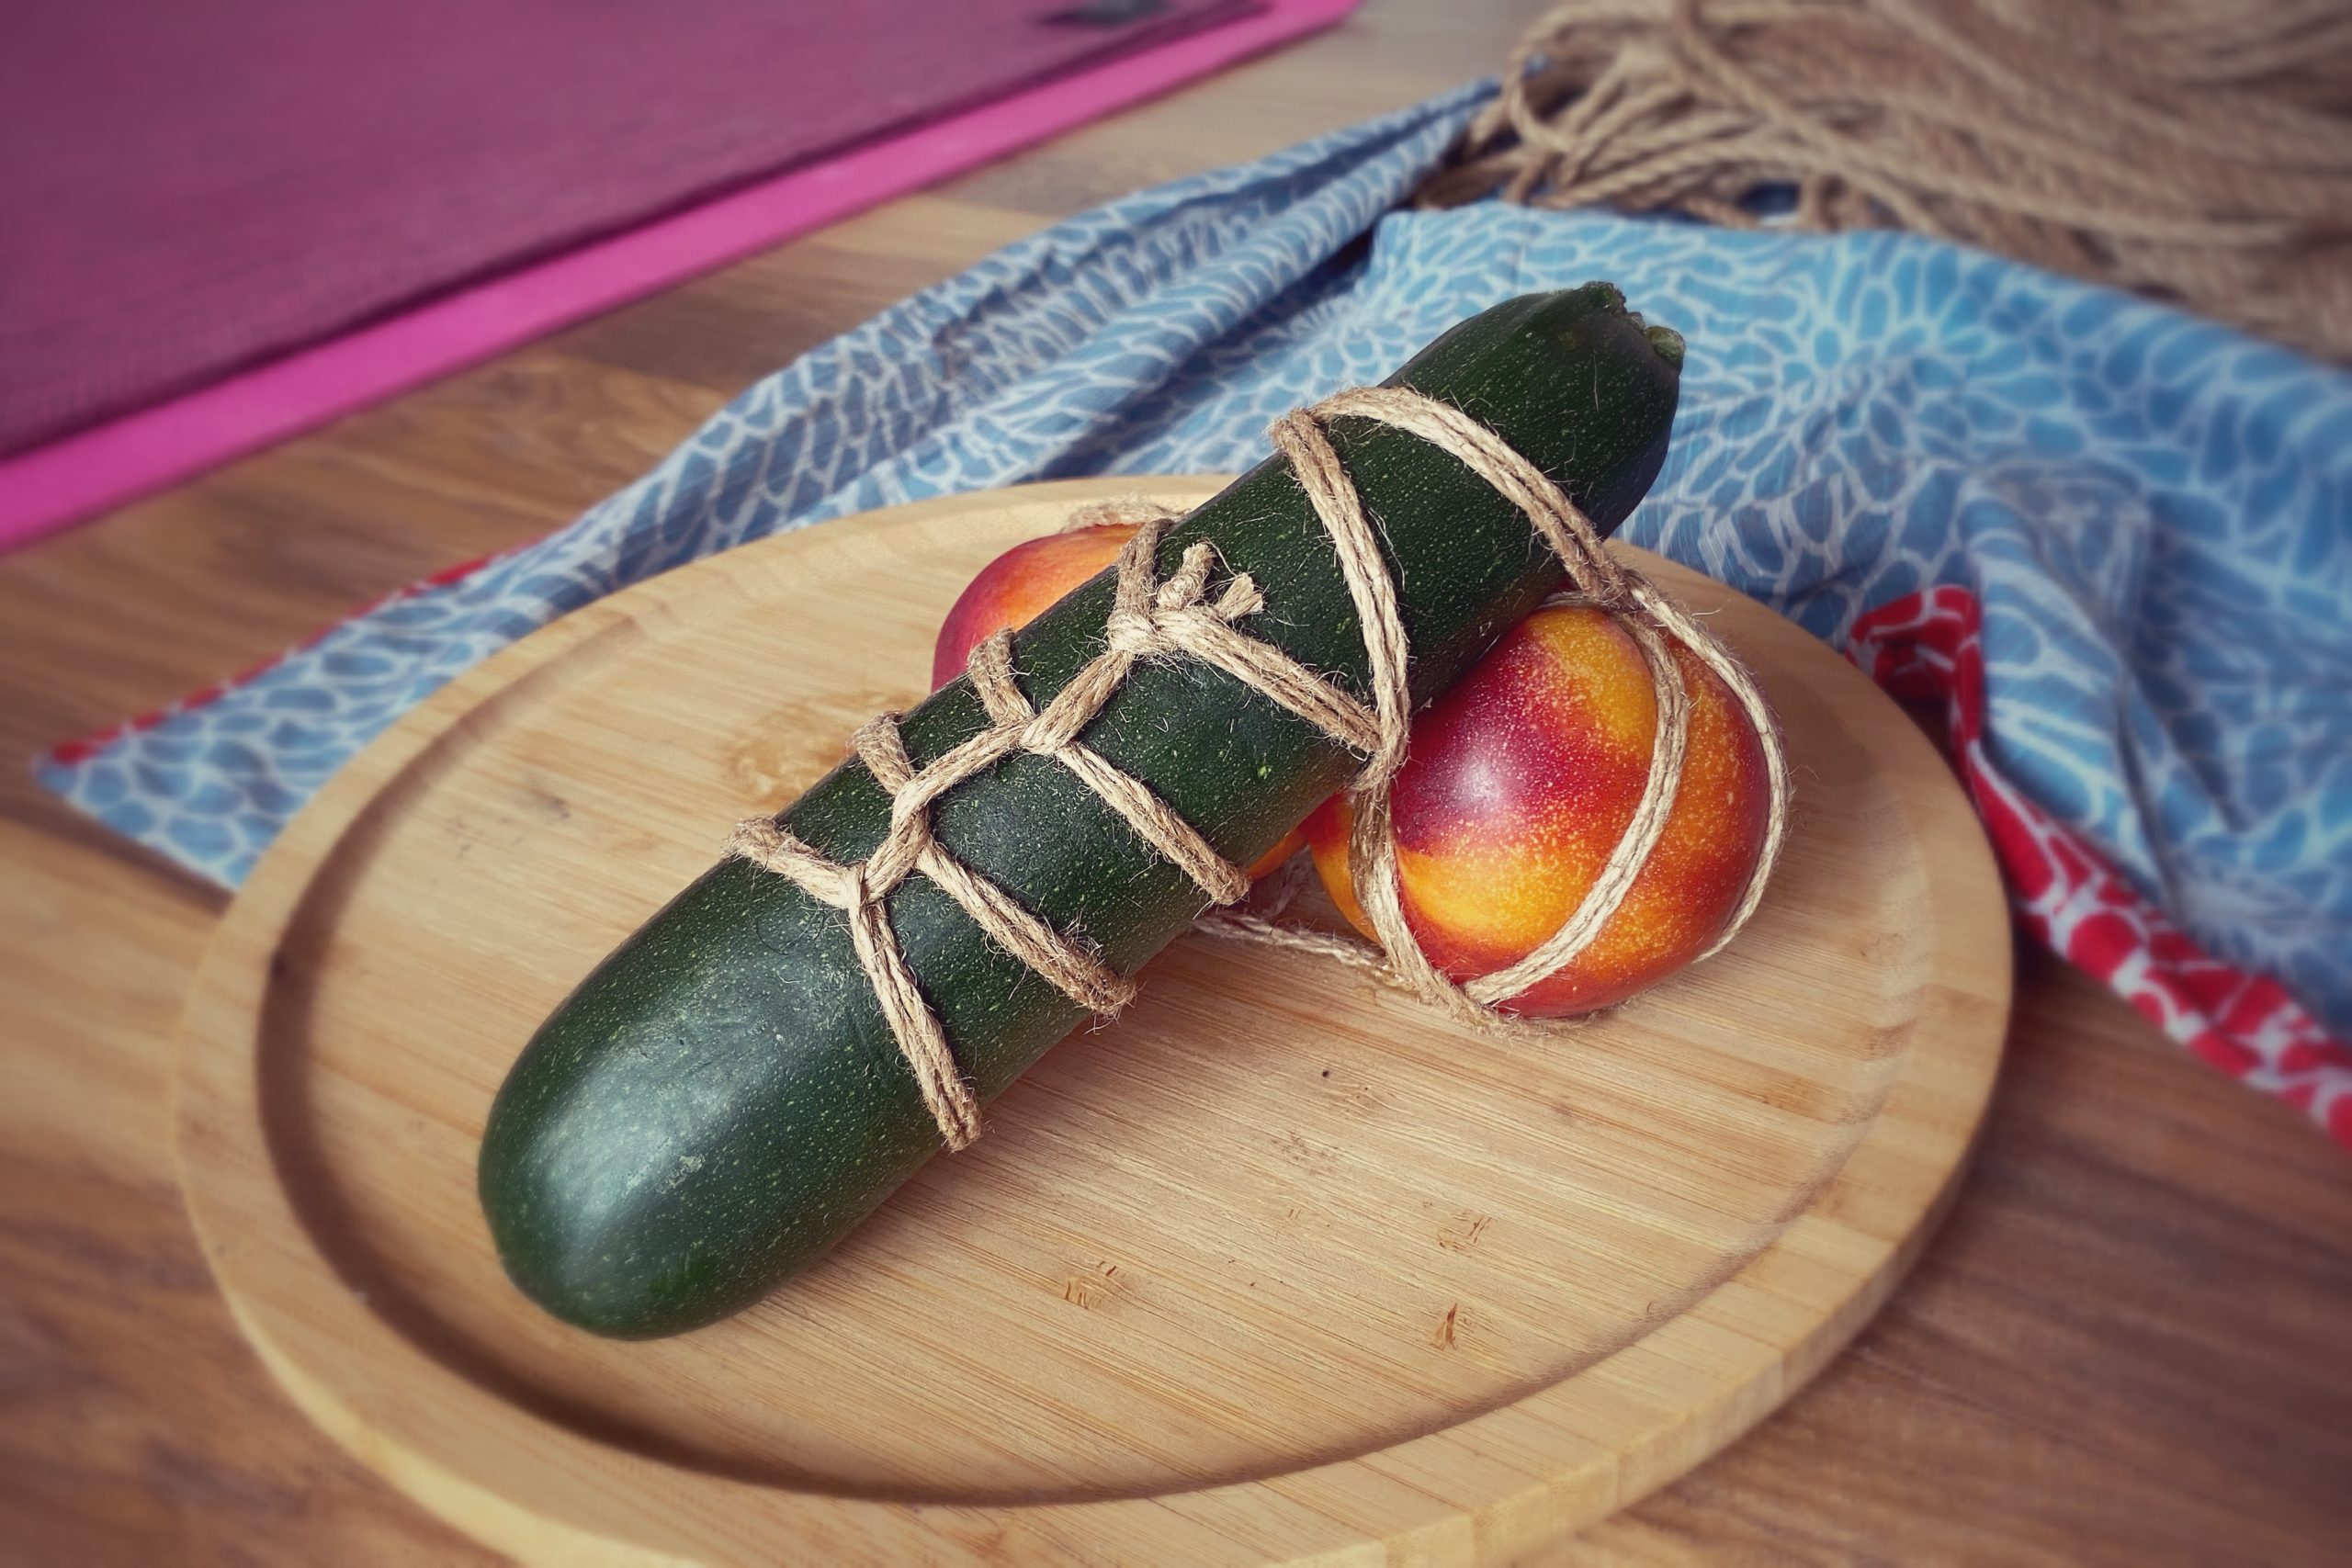 a wooden plate with a zucchini and two peaches which are tied together looking like a penis and balls